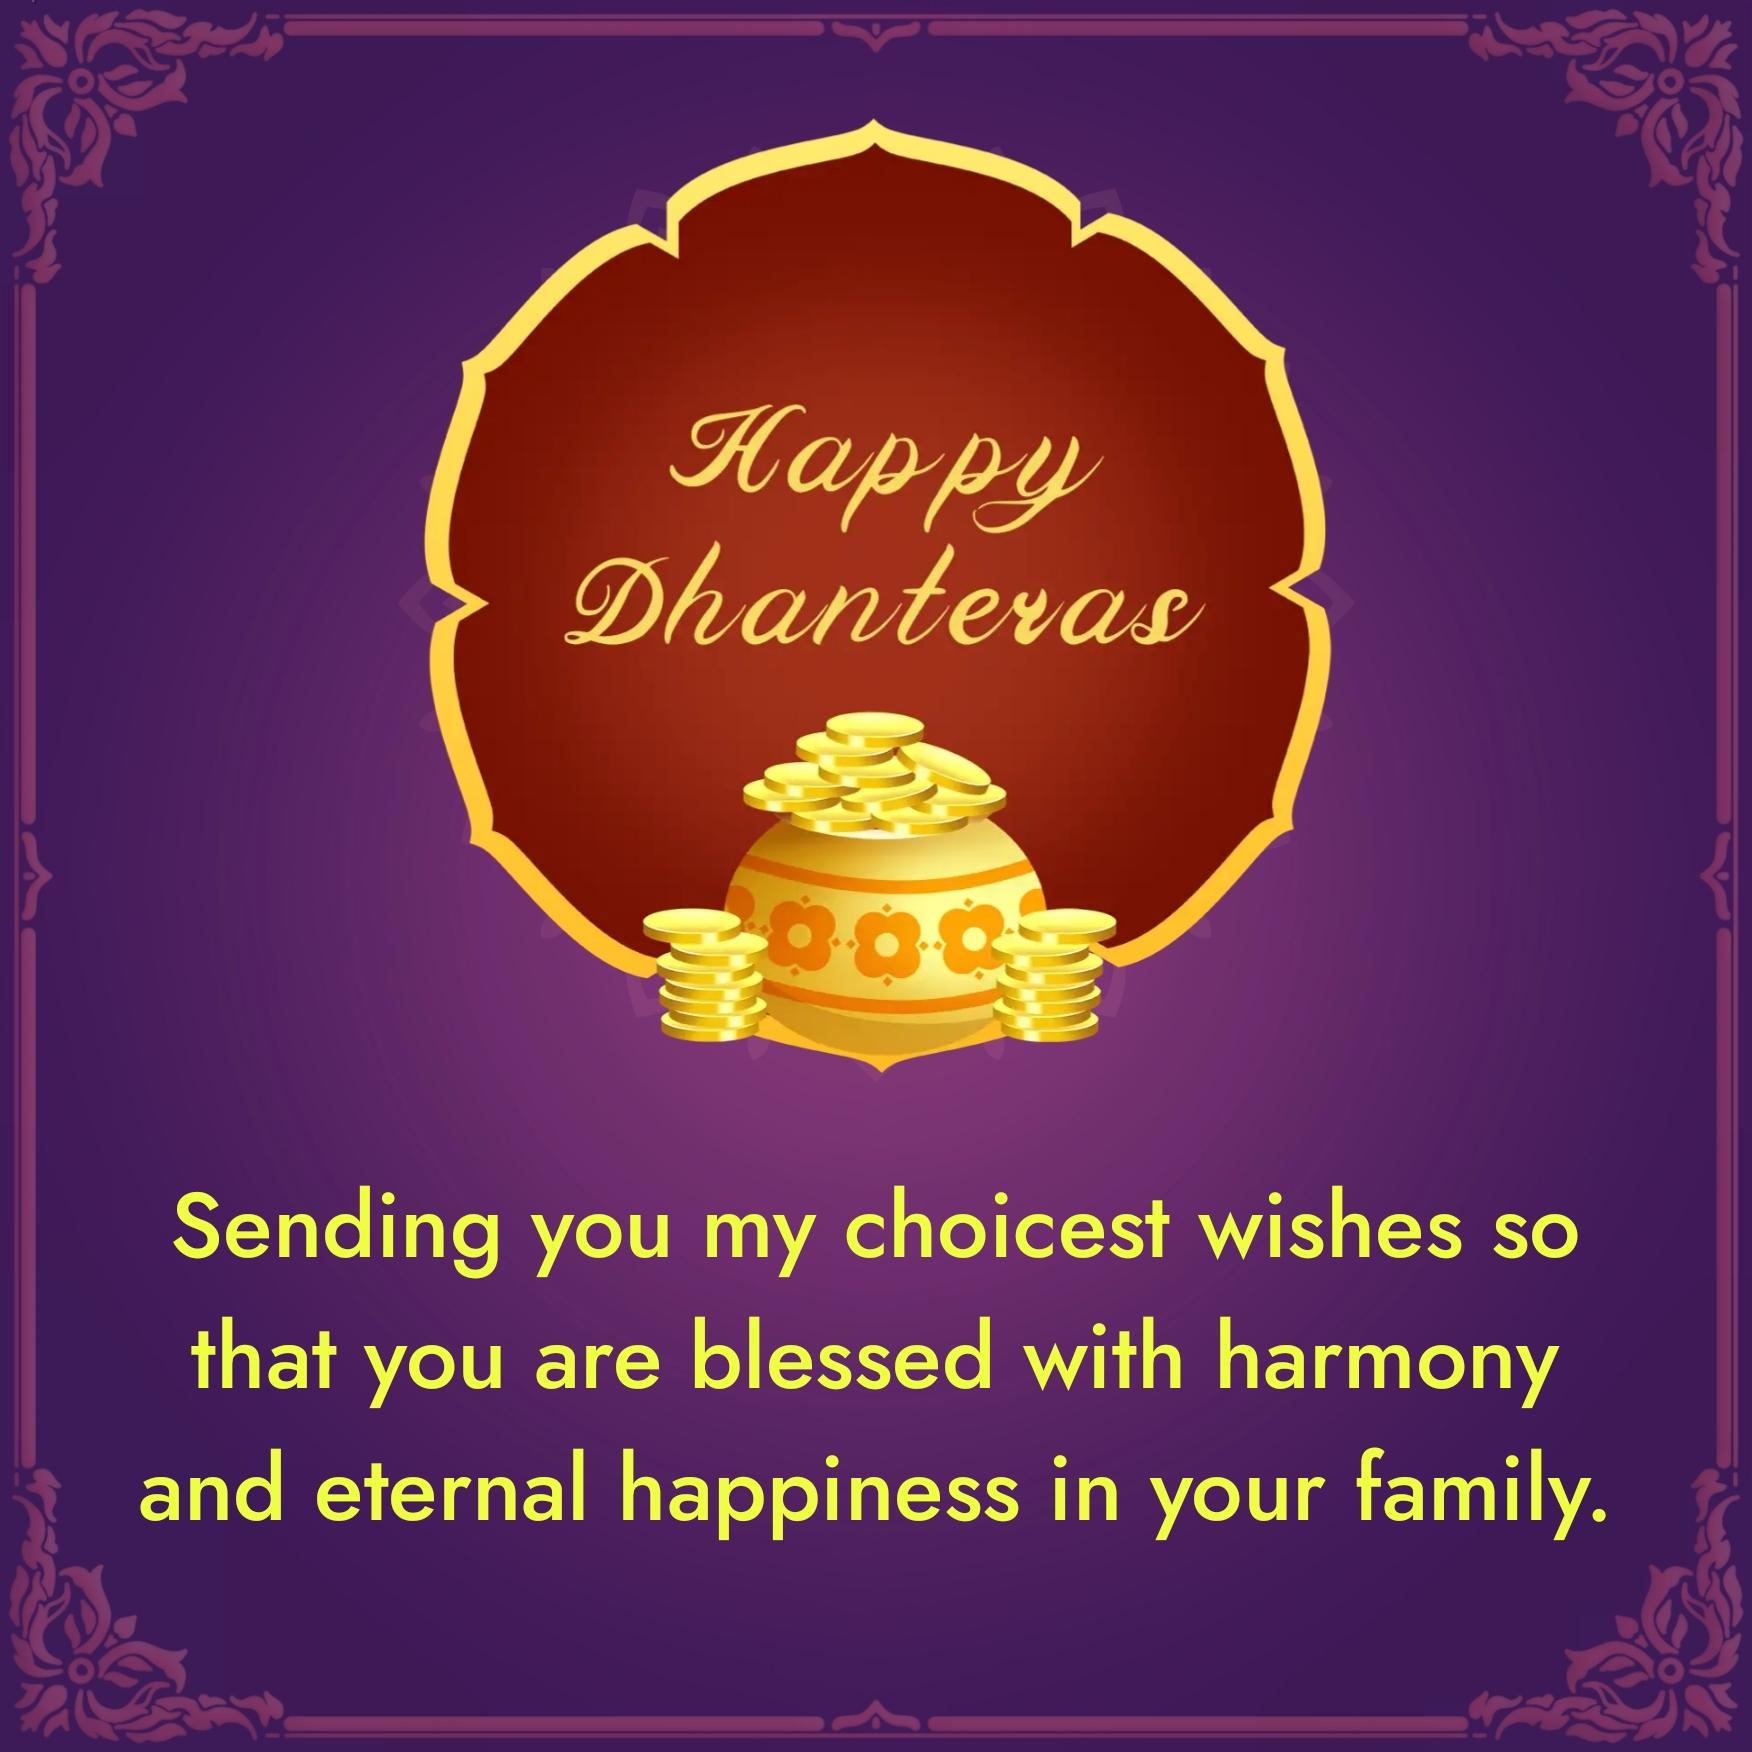 Sending you my choicest wishes so that you are blessed